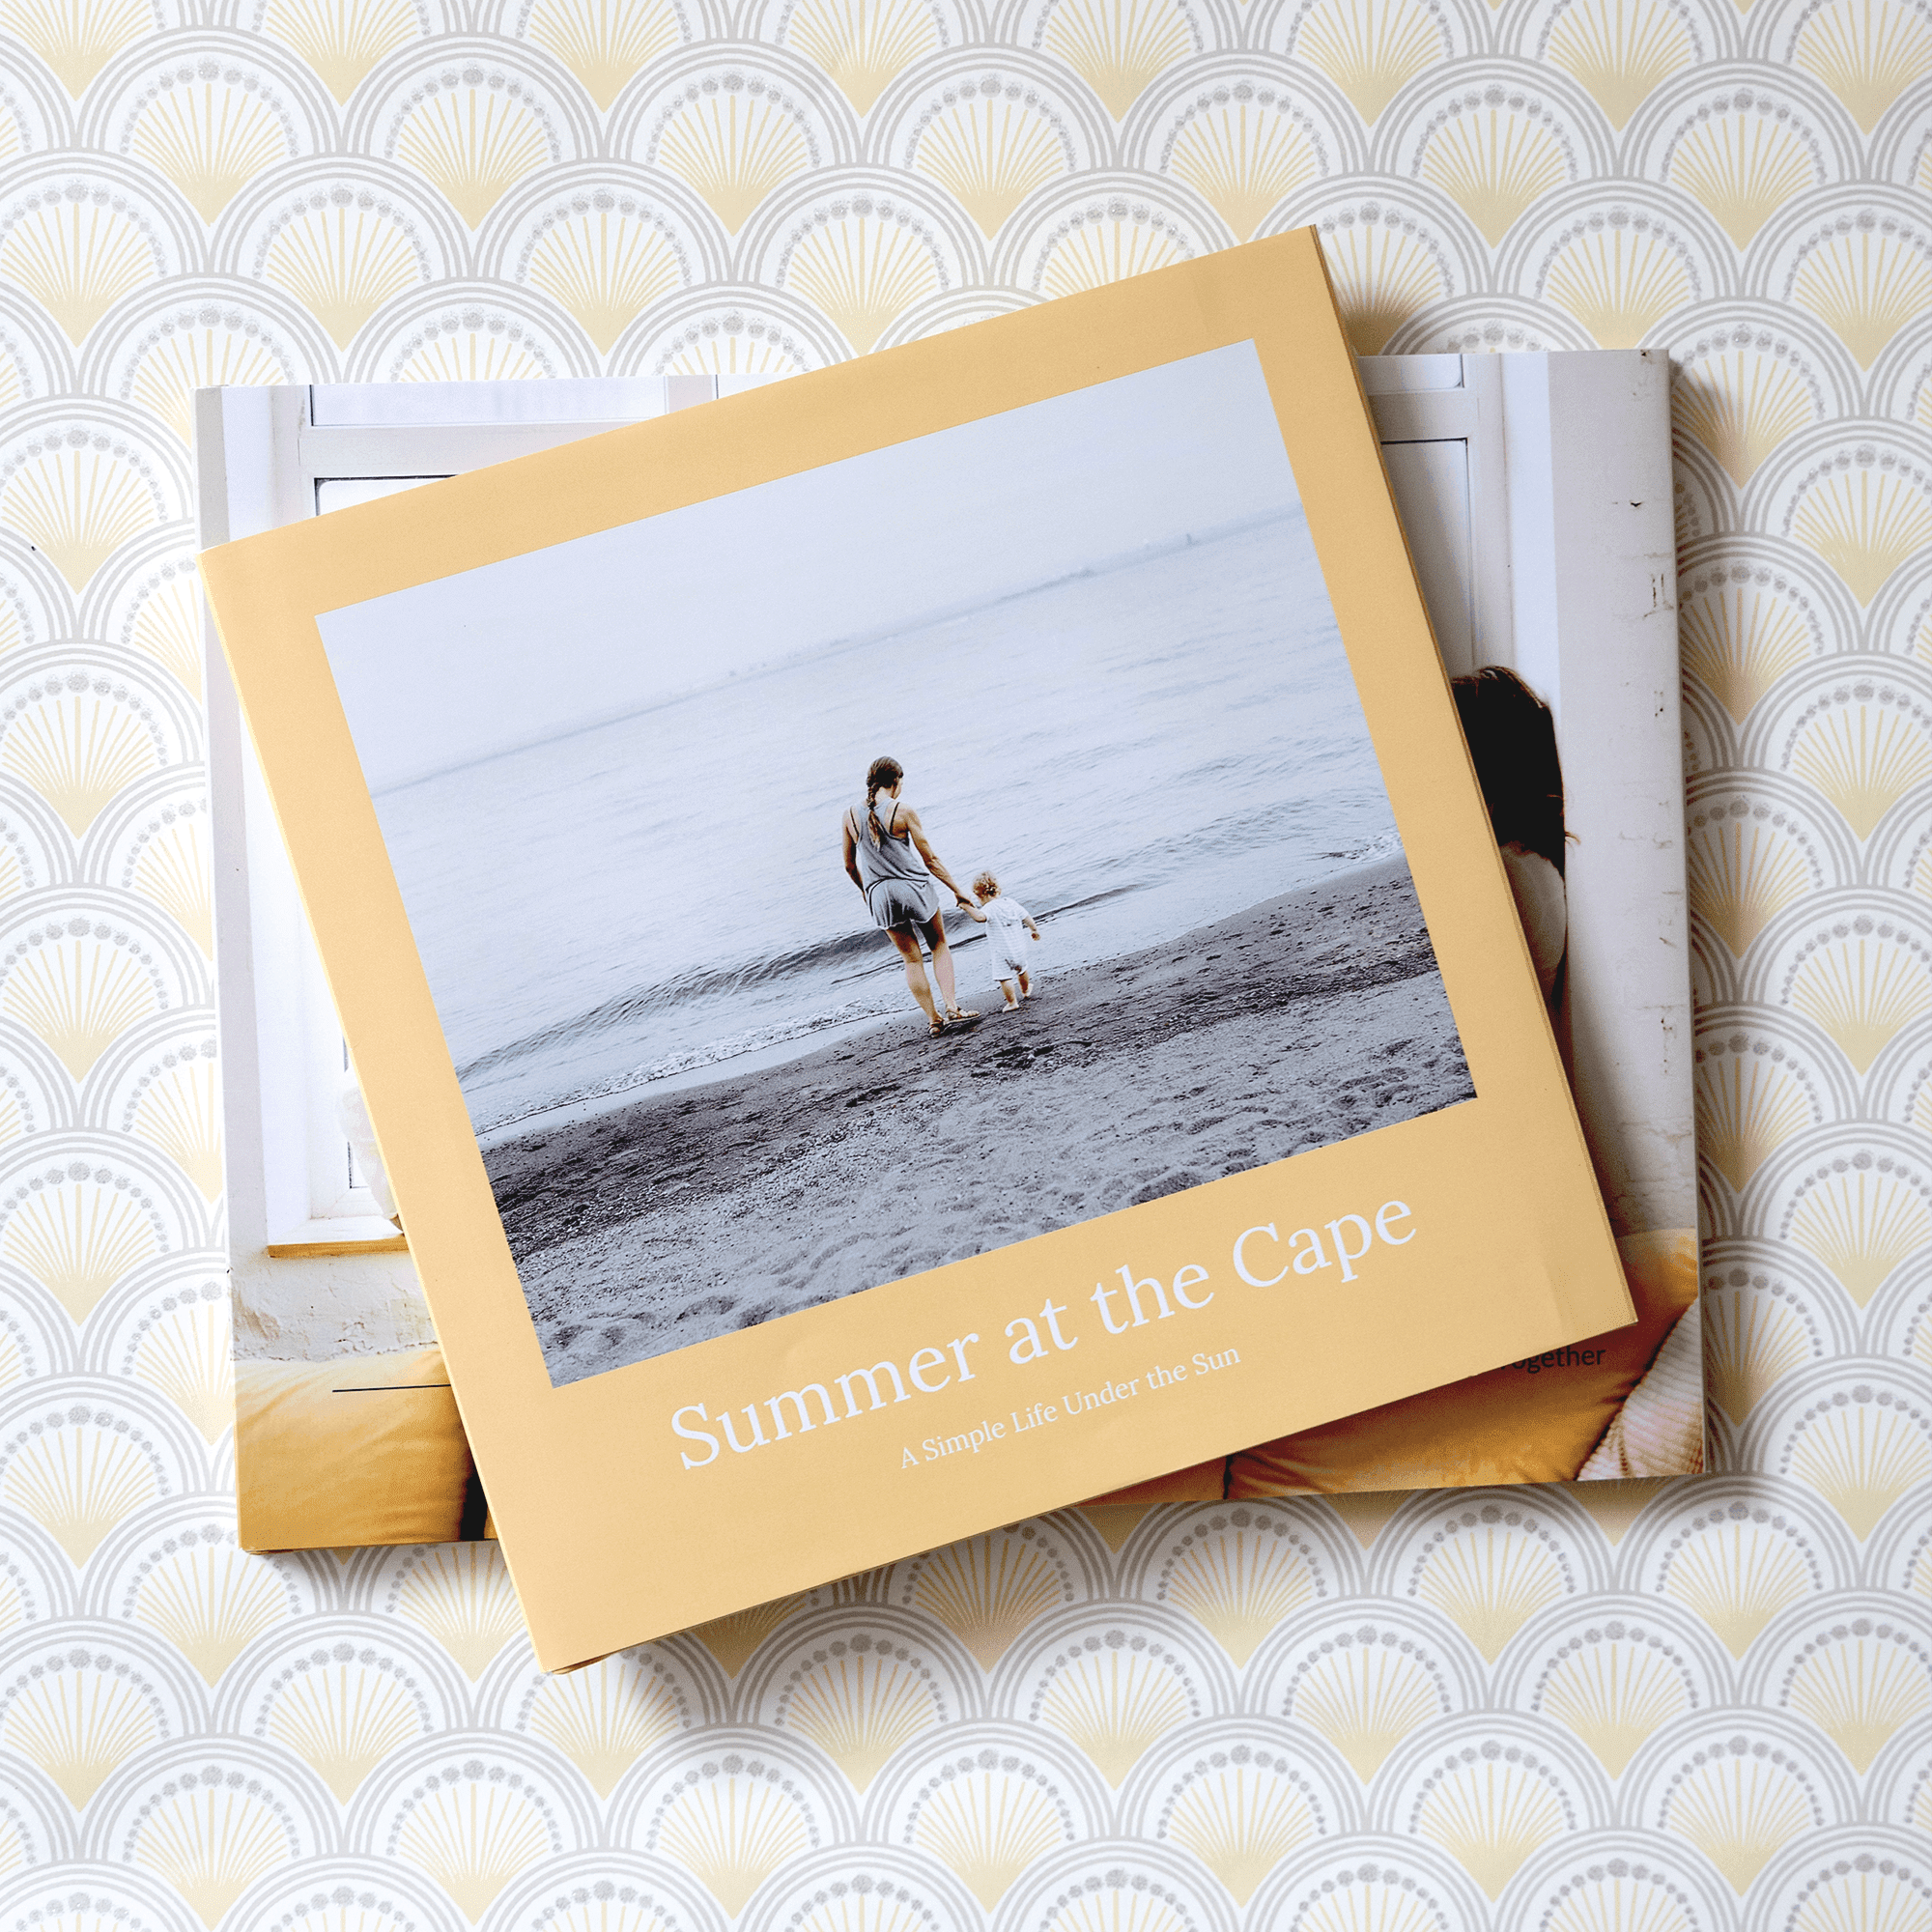 Photobook showing a trip of a Summer at the Cape.